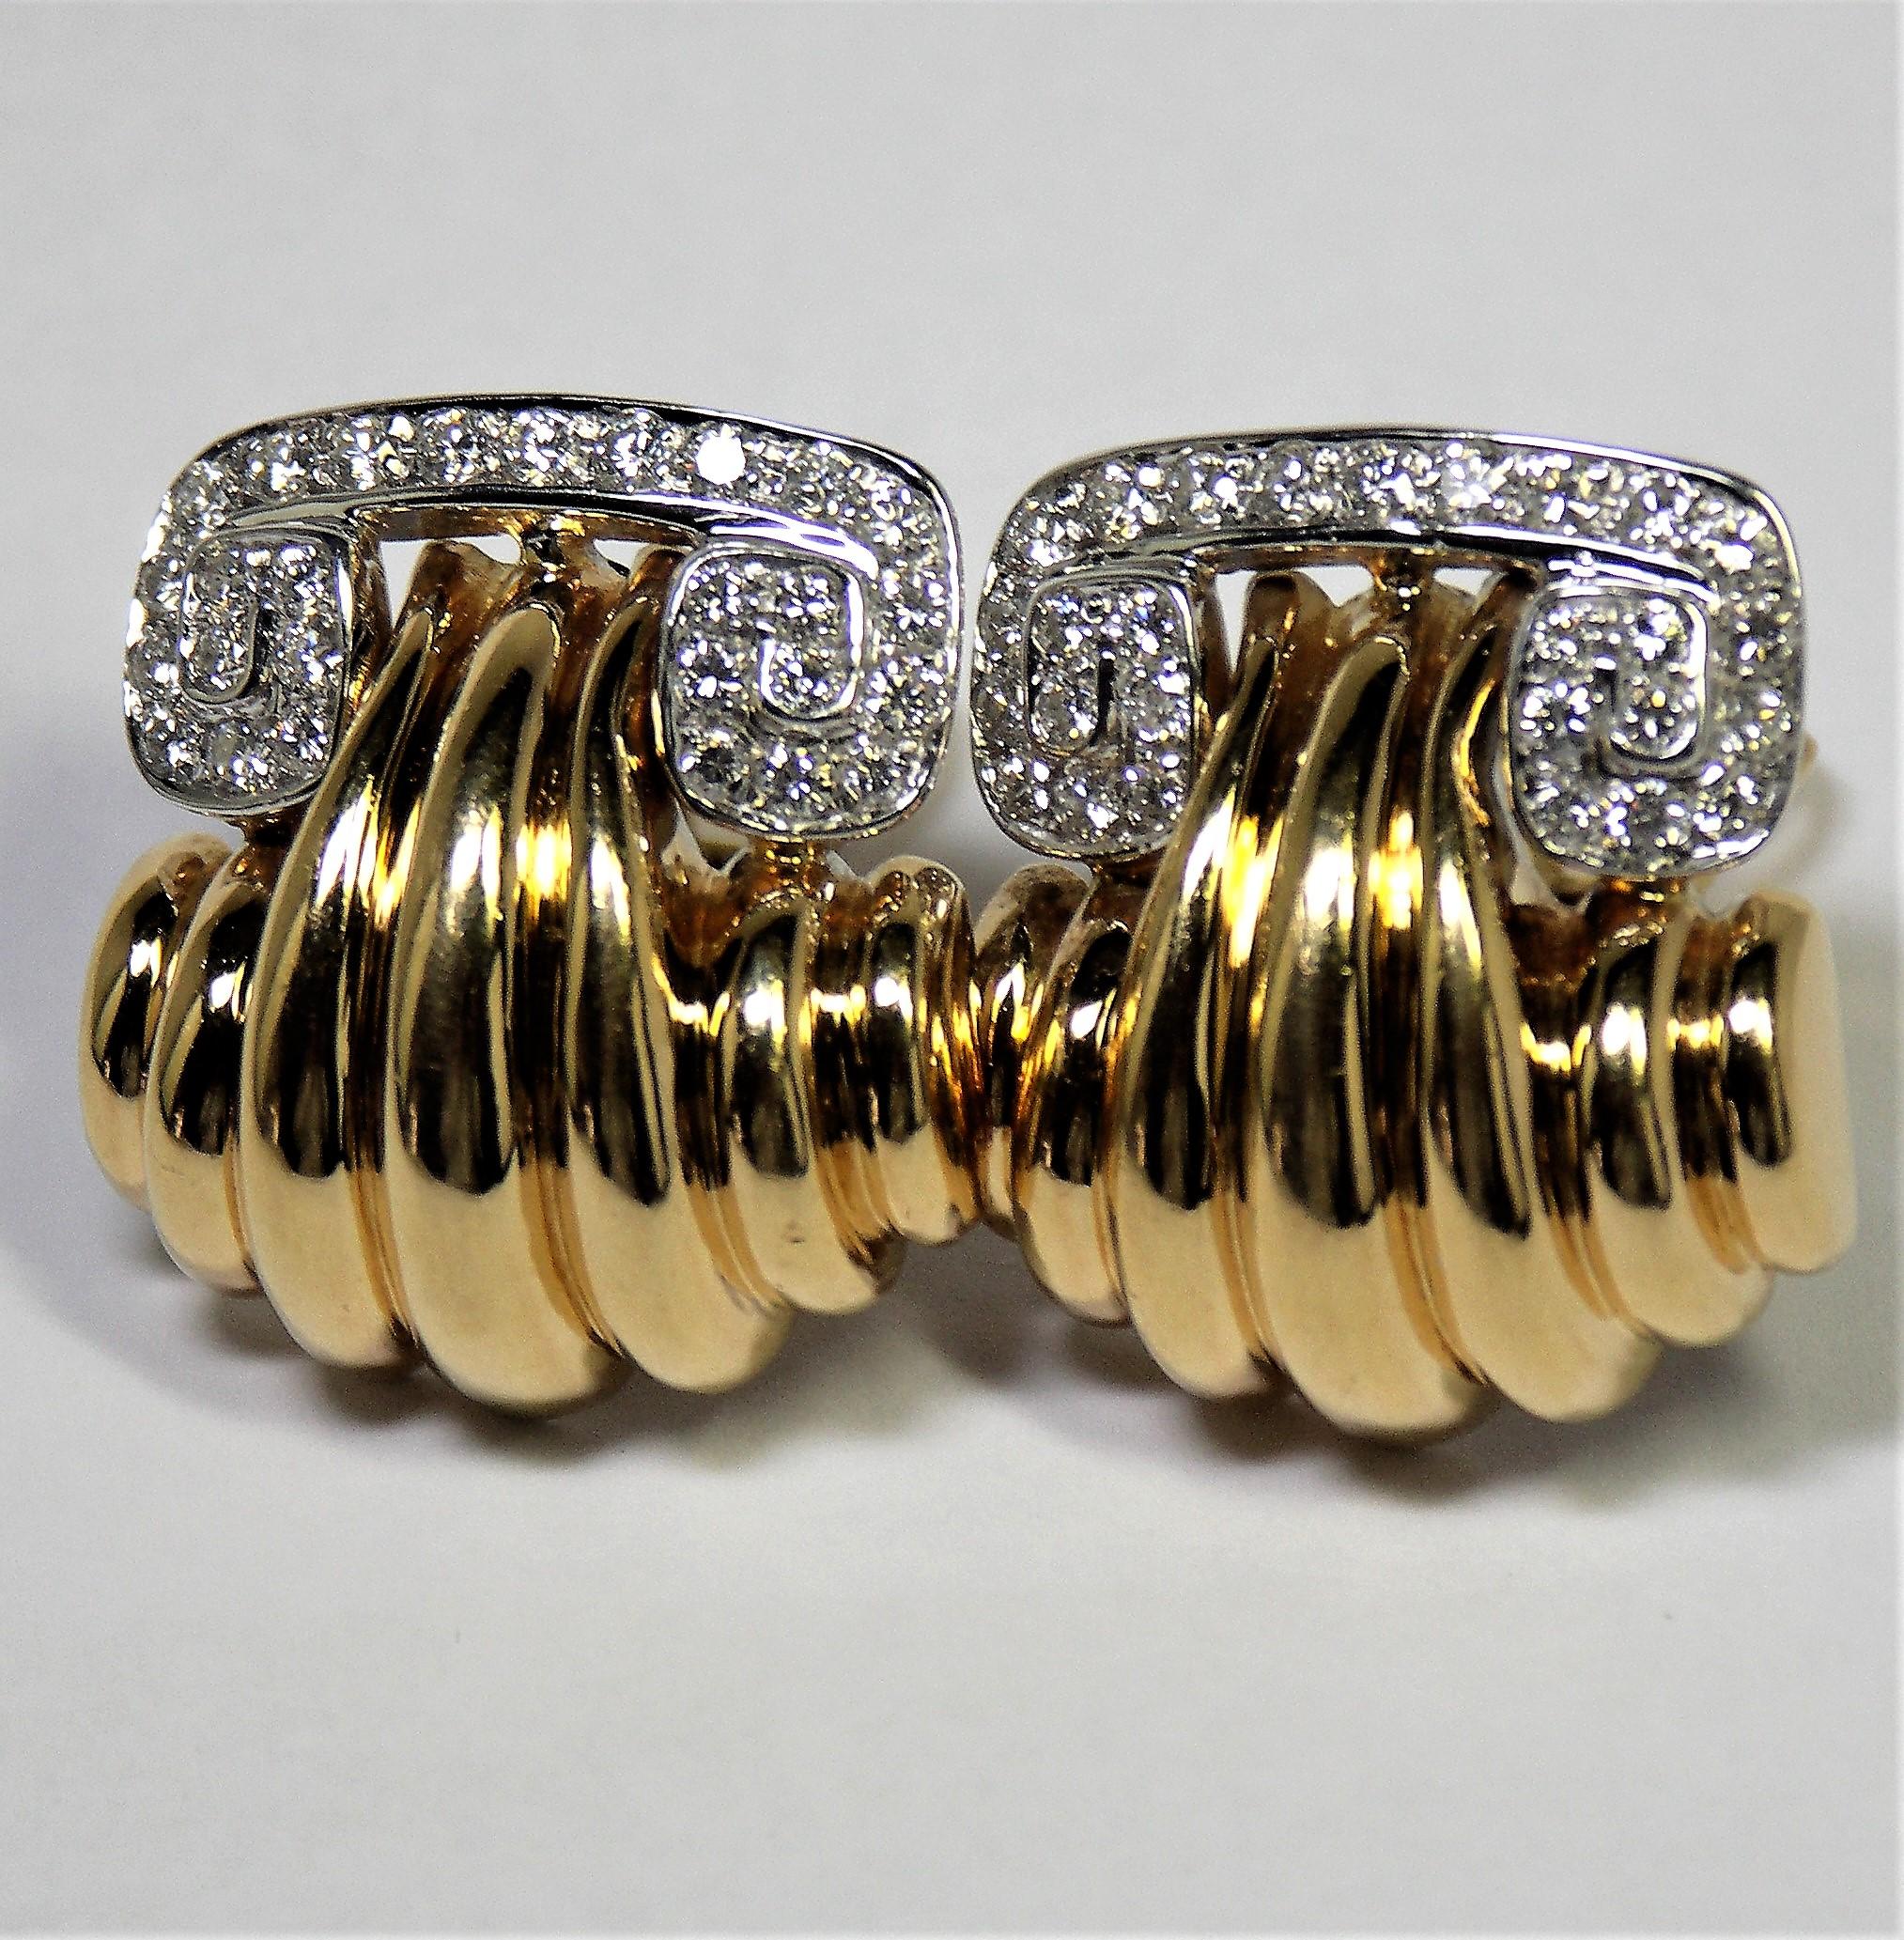 Made of 18K Yellow Gold, these classic, scroll top design clip on earrings
are set with 54 round brilliant cut diamonds weighing an approximate total weight of 2.30 carats of overall G Color and VS1 Clarity. Measuring 
1  3/16 inch from top to